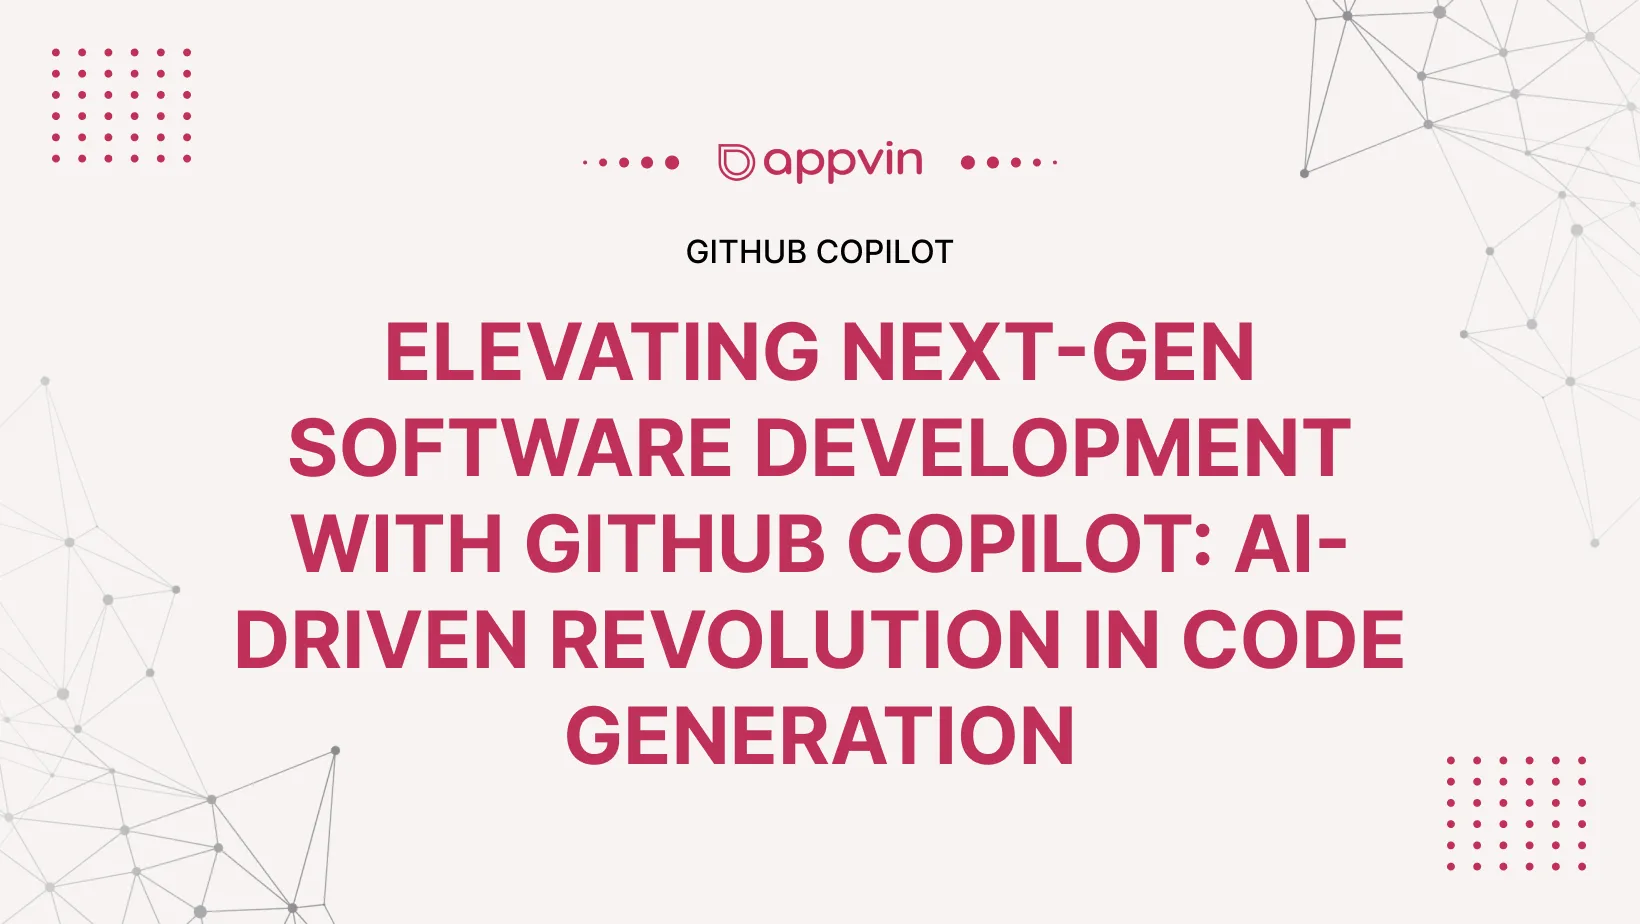 Elevating Next-Gen Software Development with GitHub Copilot: AI-Driven Revolution in Code Generation